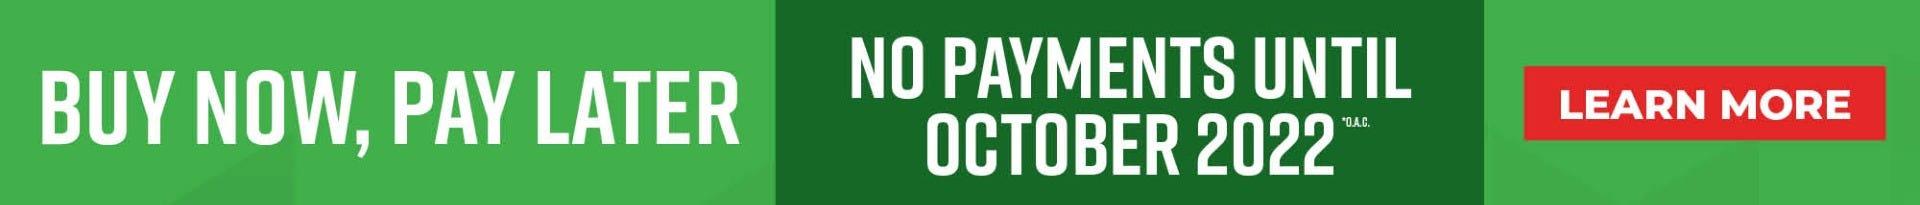 Buy Now, Pay Later - No Payments Until October 2022